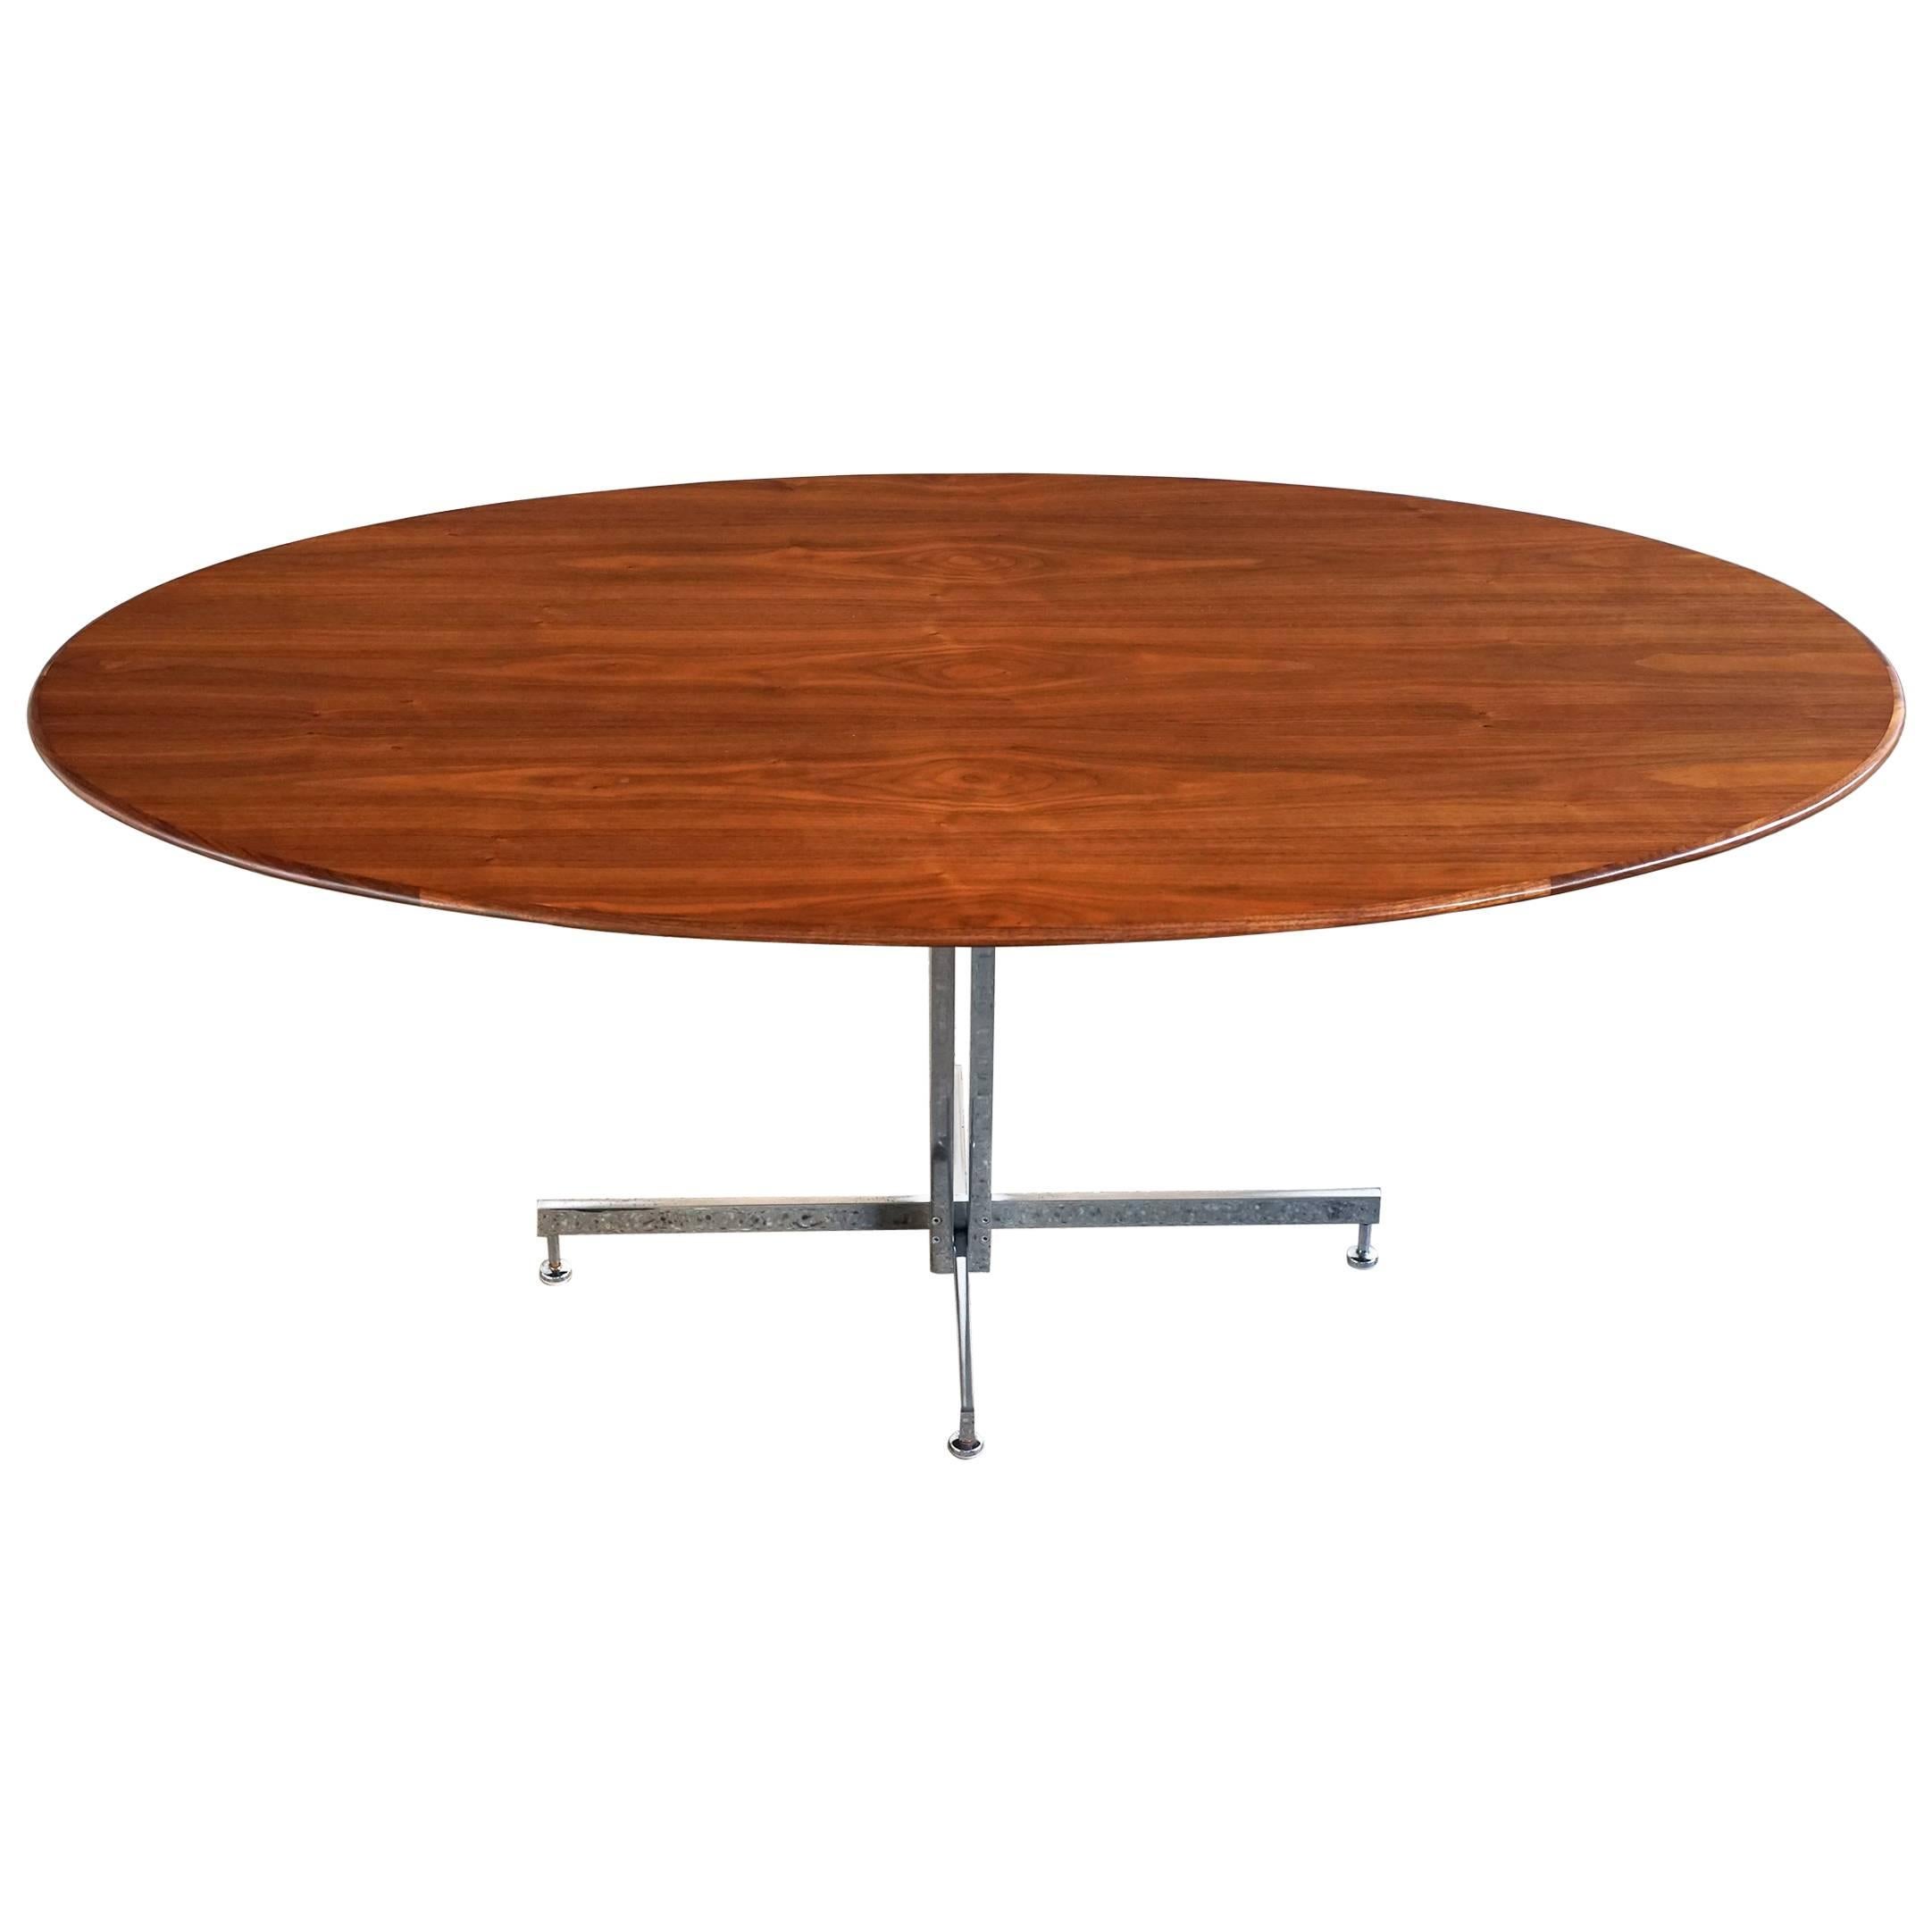 Hugh Acton Oval Dining Table